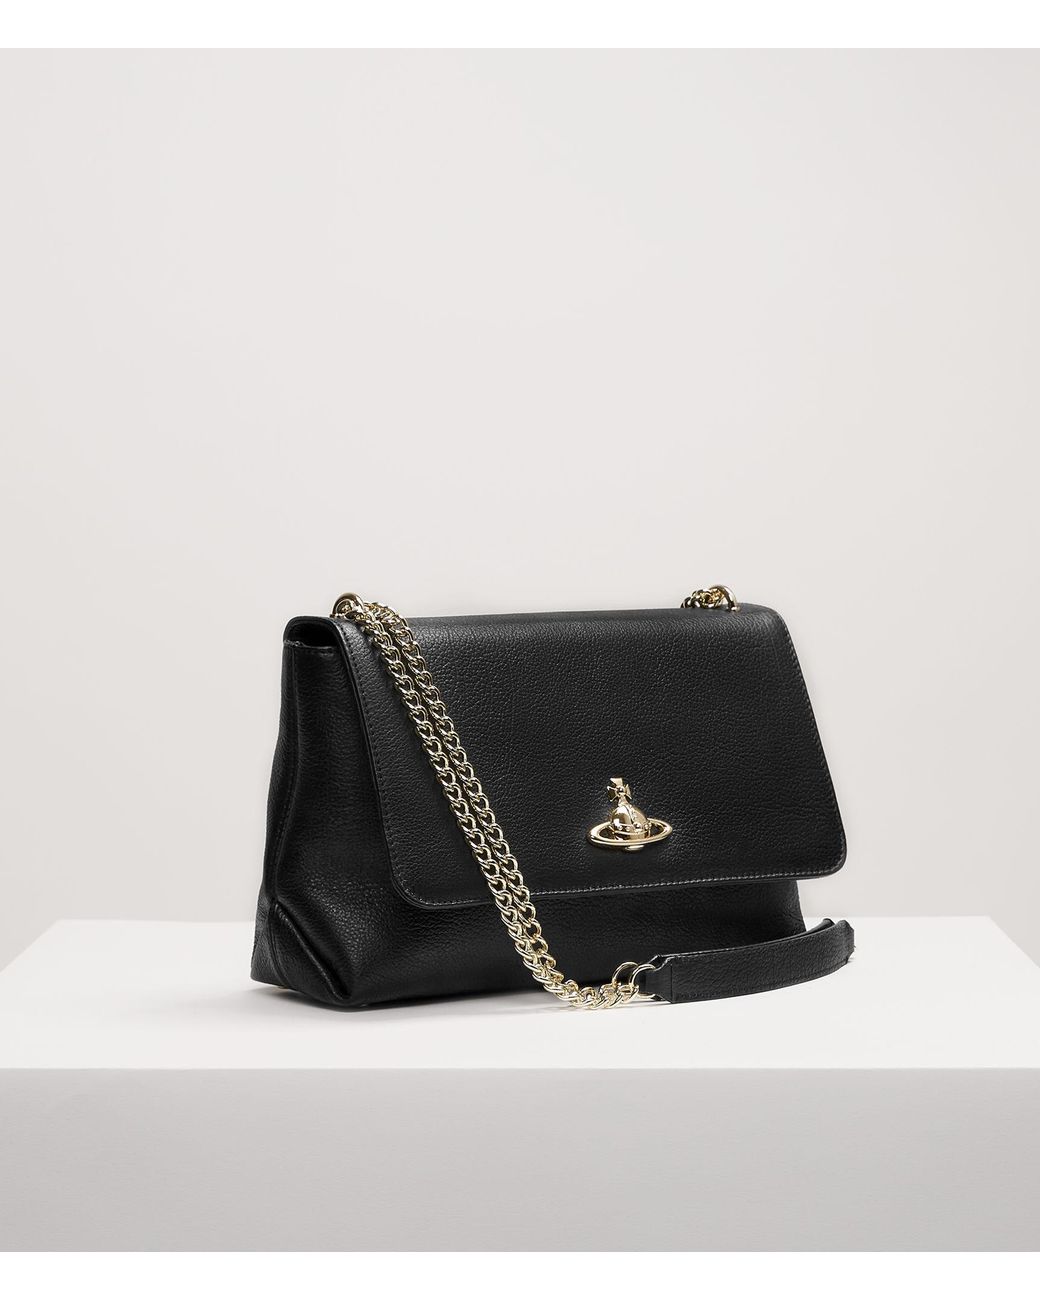 Vivienne Westwood Balmoral Large Bag With Chain And Flap in Black | Lyst UK